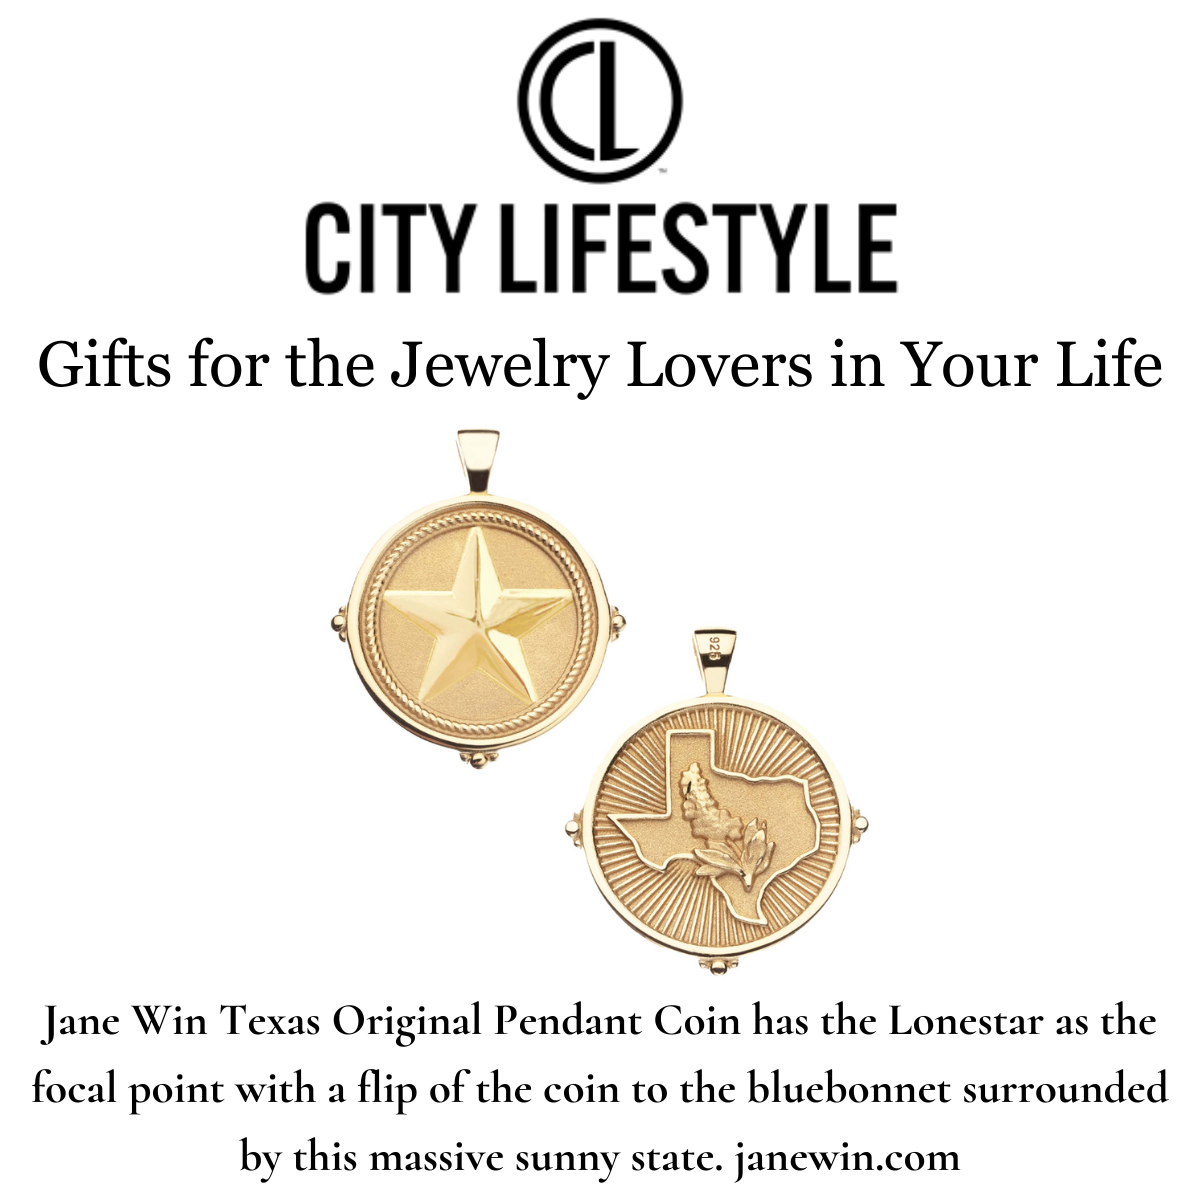 Press Highlight: City Lifestyle "Best Gifts for Jewelry Lovers in Your Life"